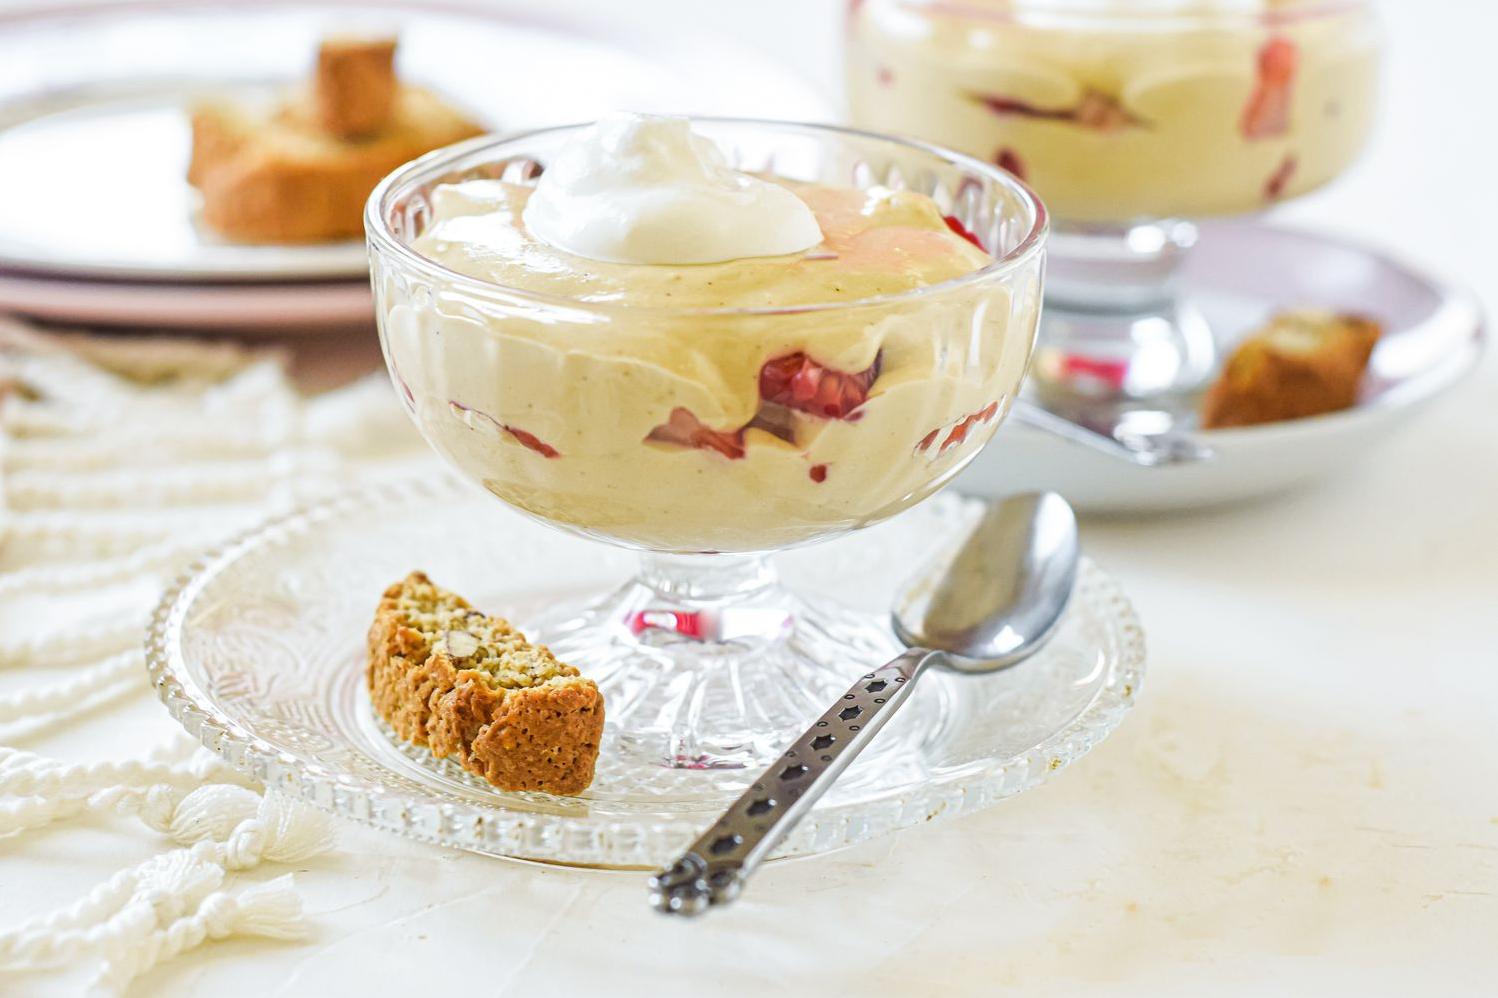  Wine and custard, a dreamy combination that will leave you spellbound.